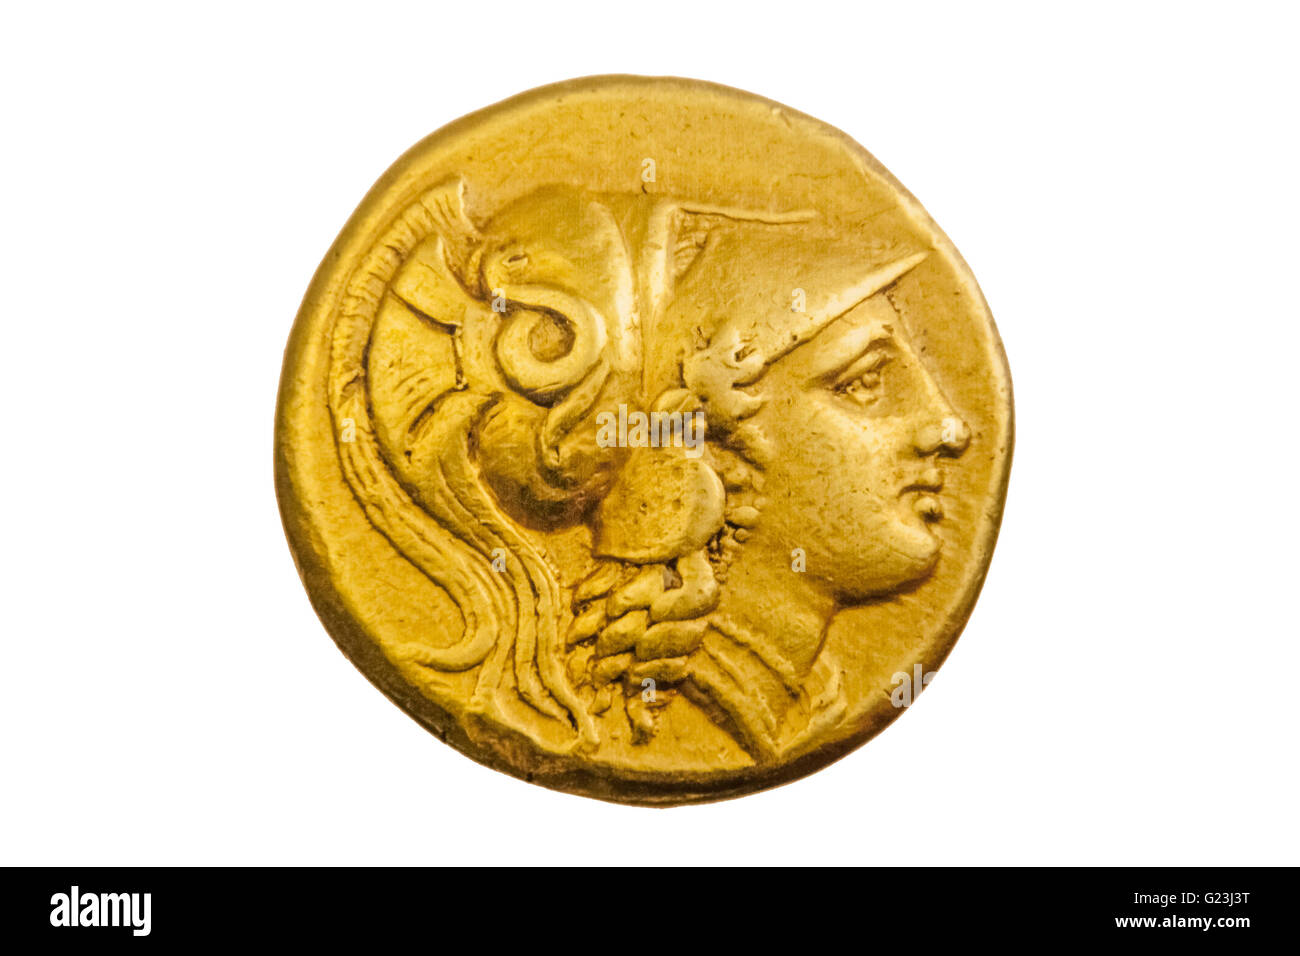 Ancient Greek gold coin, Alexander the Great, 3rd century BC, in white background Stock Photo